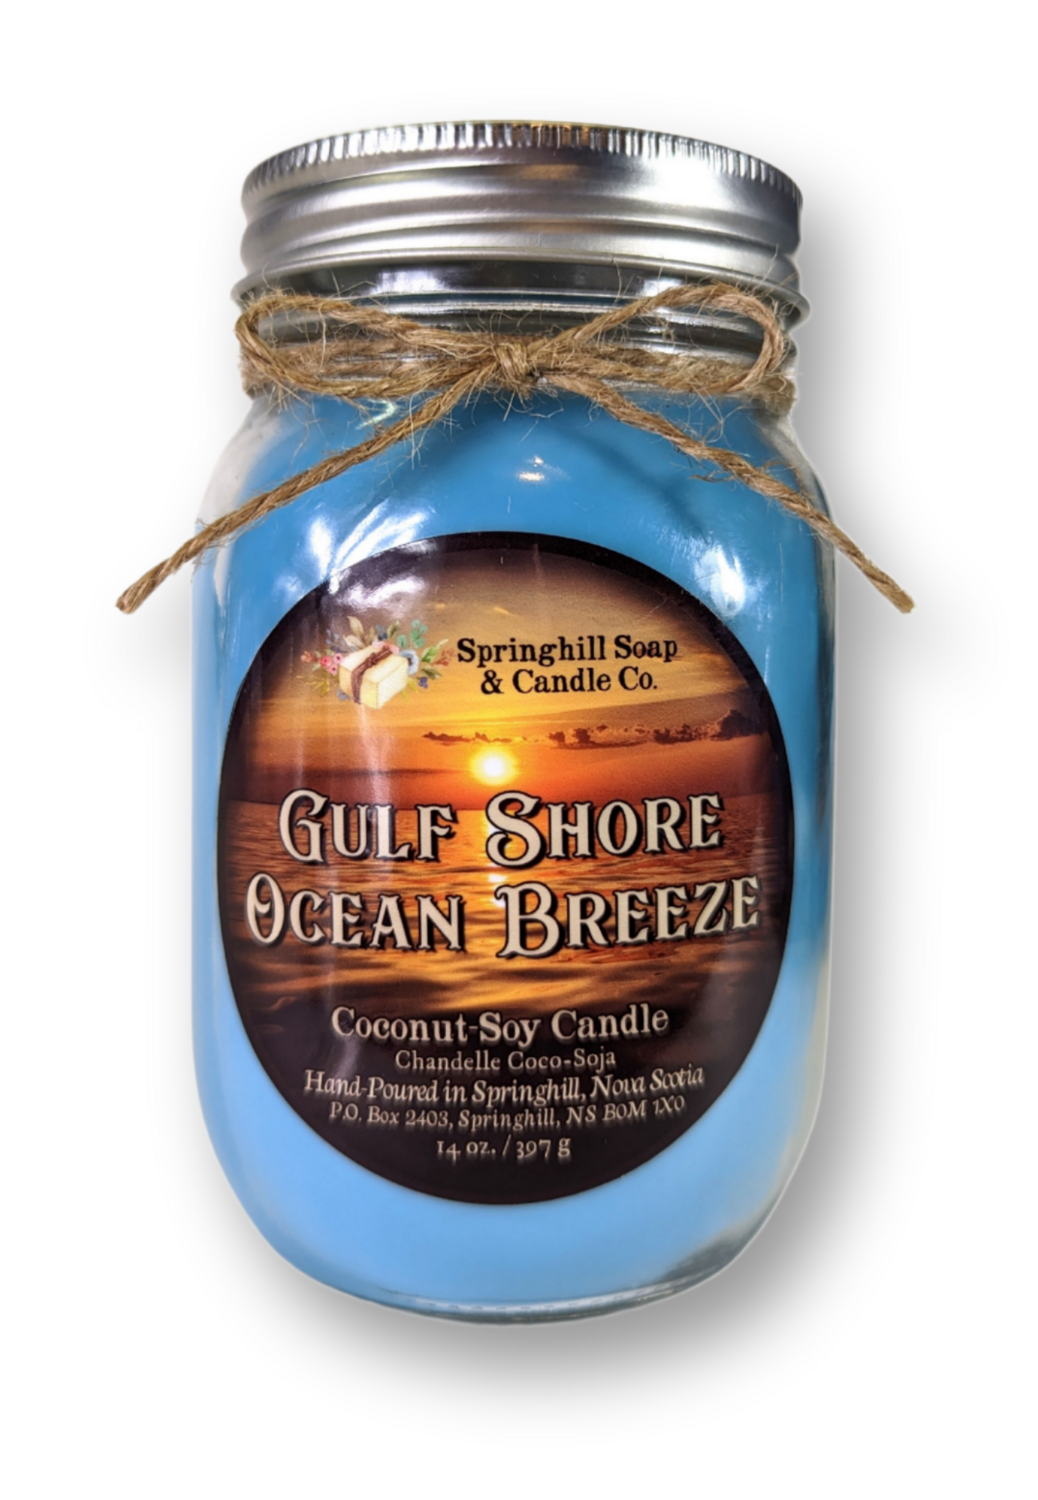 Gulf Shore Ocean Breeze 14oz Coconut-Soy Candle